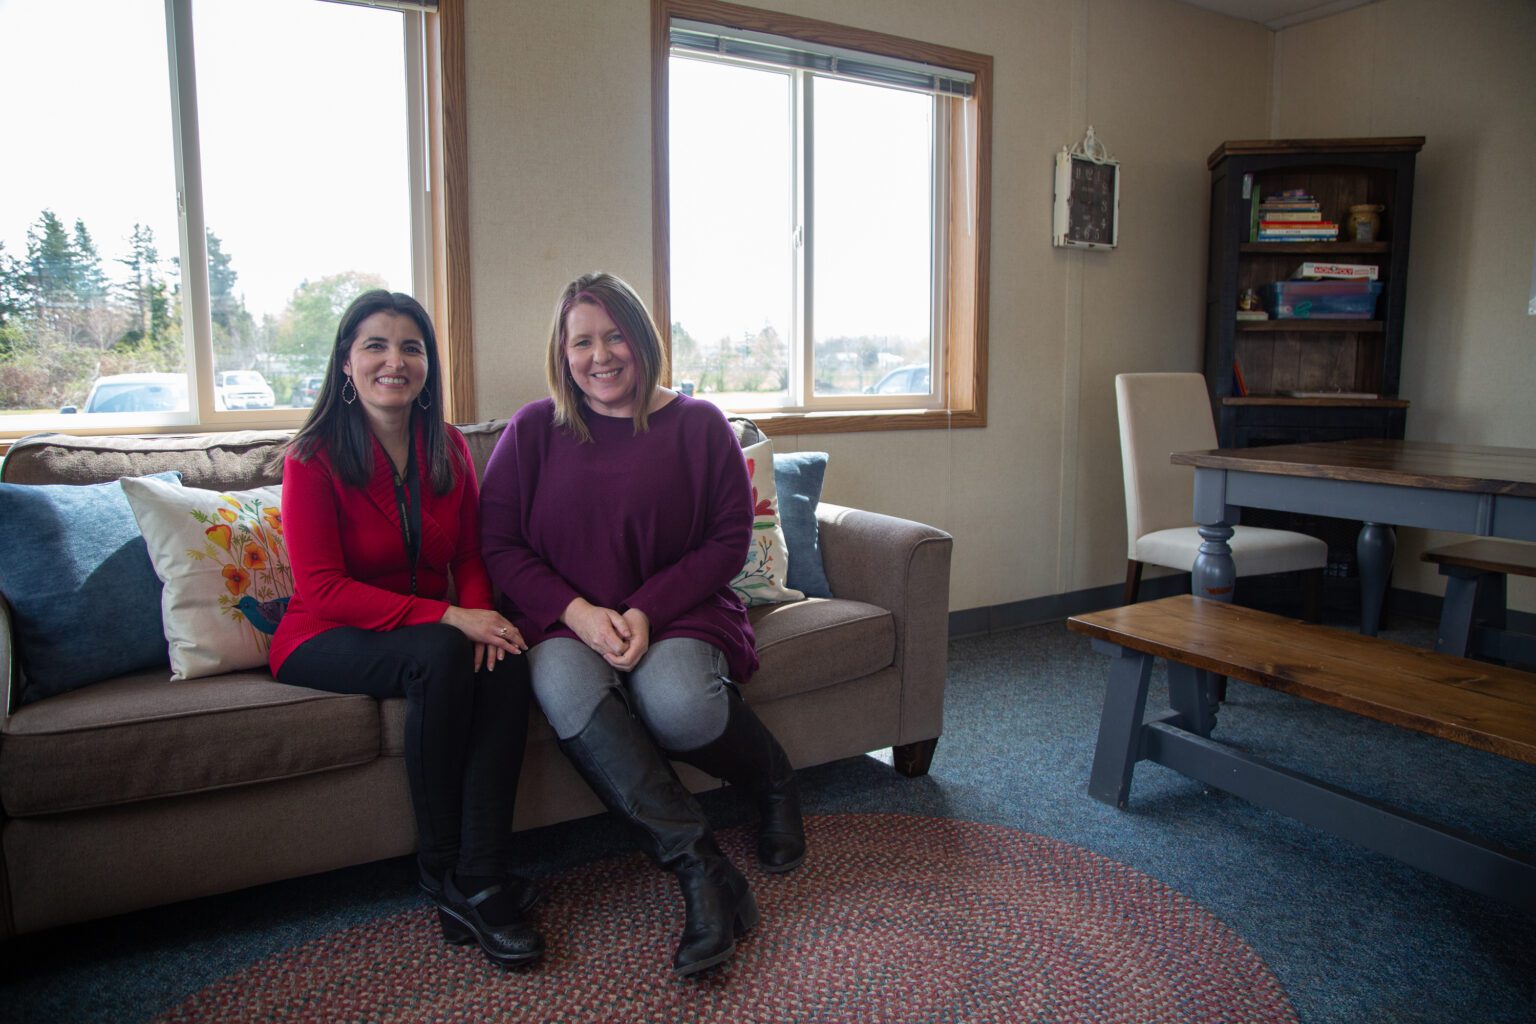 Cultural liaison Elvira Rozen and family services coordinator Alicia Roberts sit on the couch in Meridian School District's new Family Resource Center at Irene Reither Elementary School on April 25.